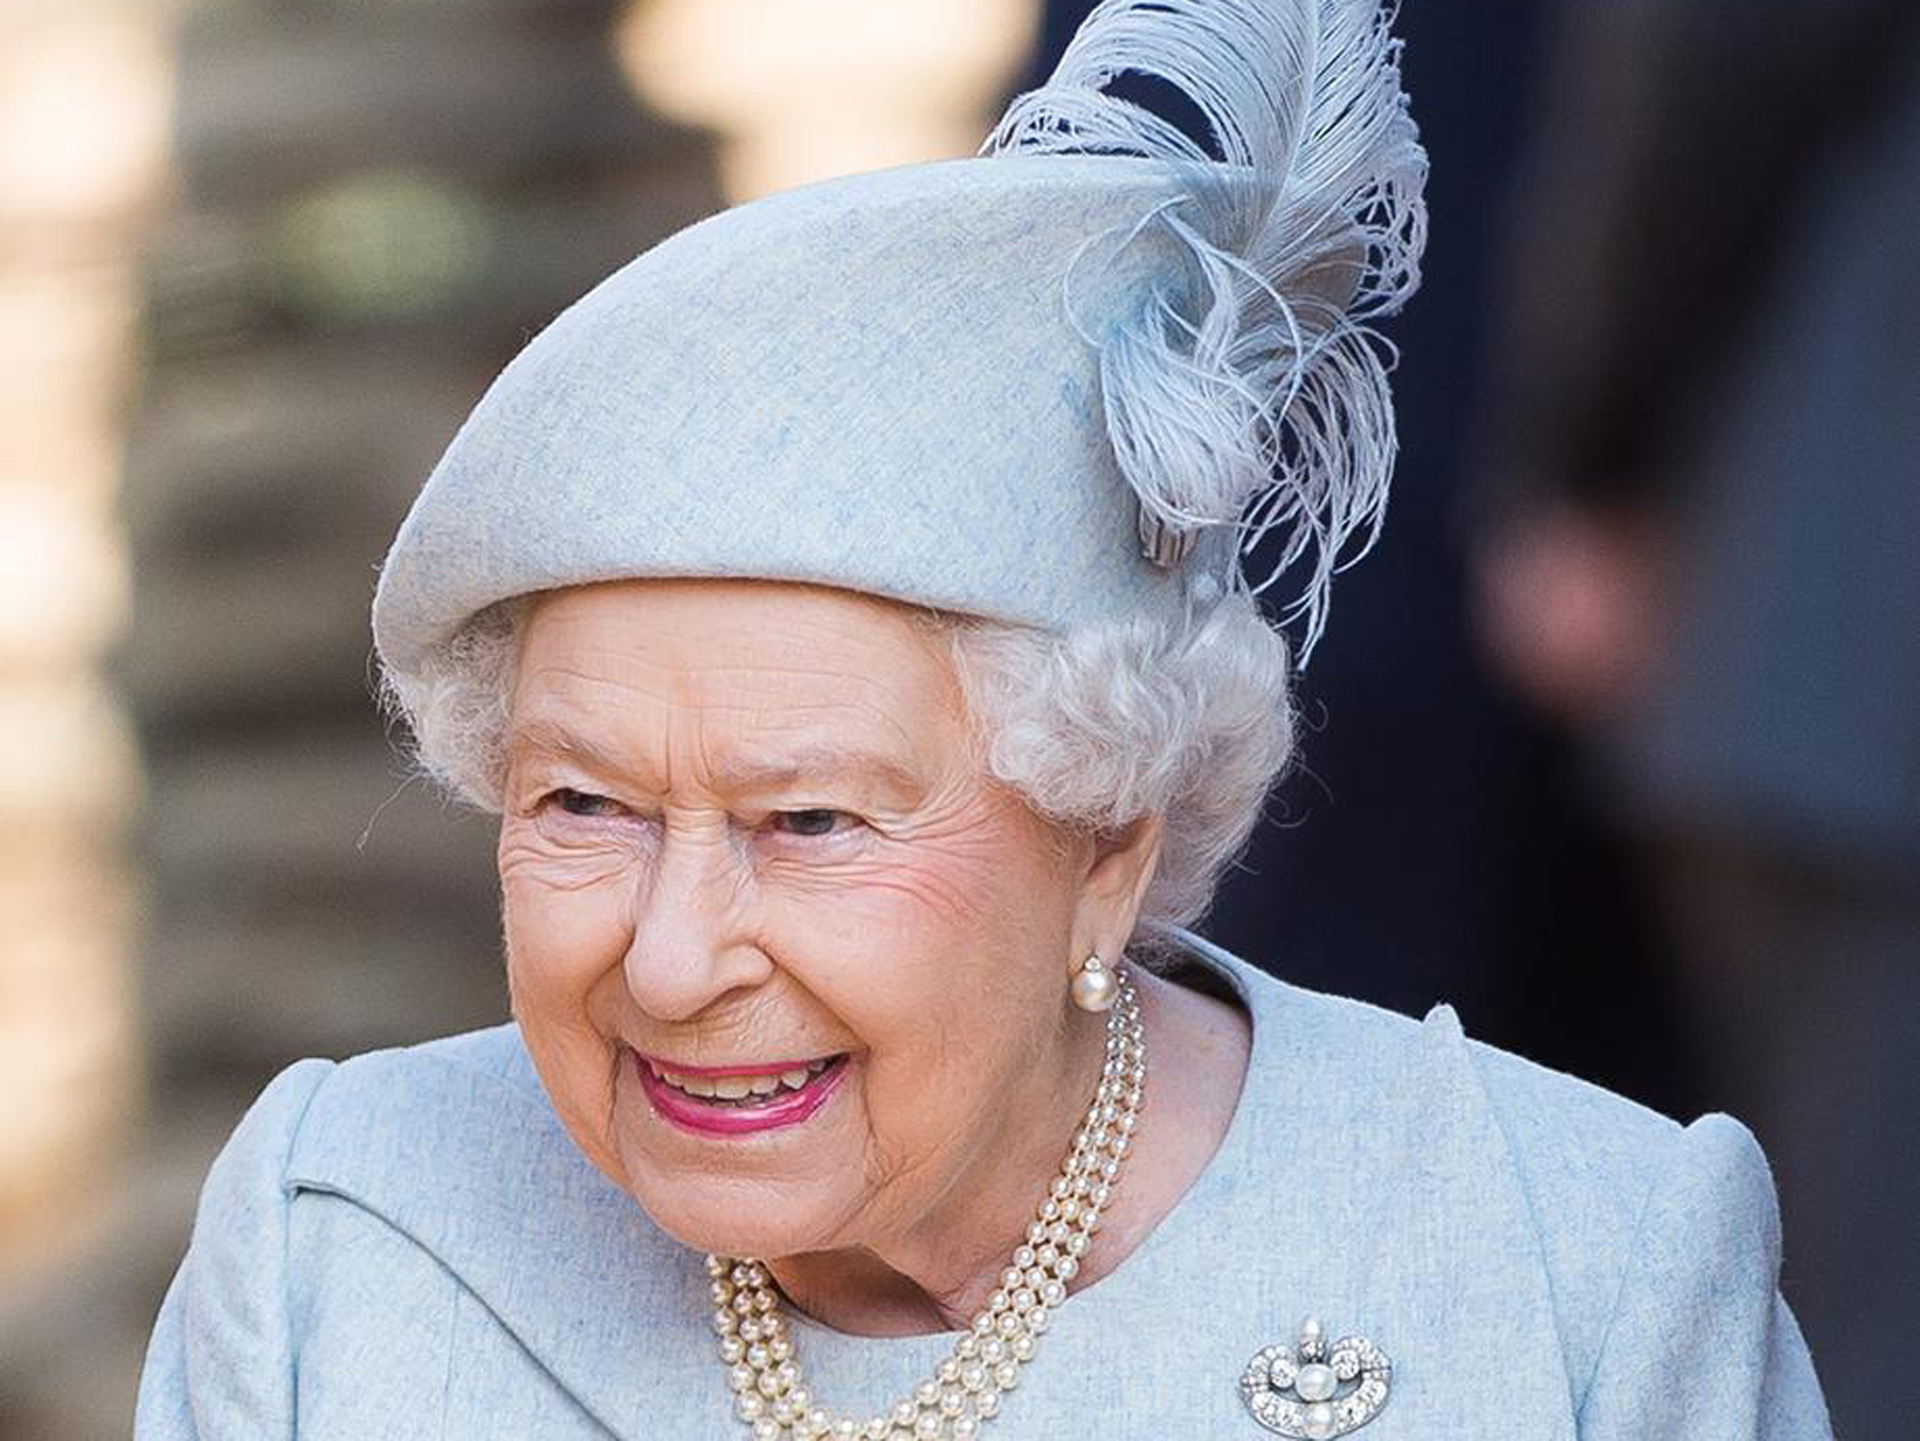 The Queen misses church service at Sandringham due to illness